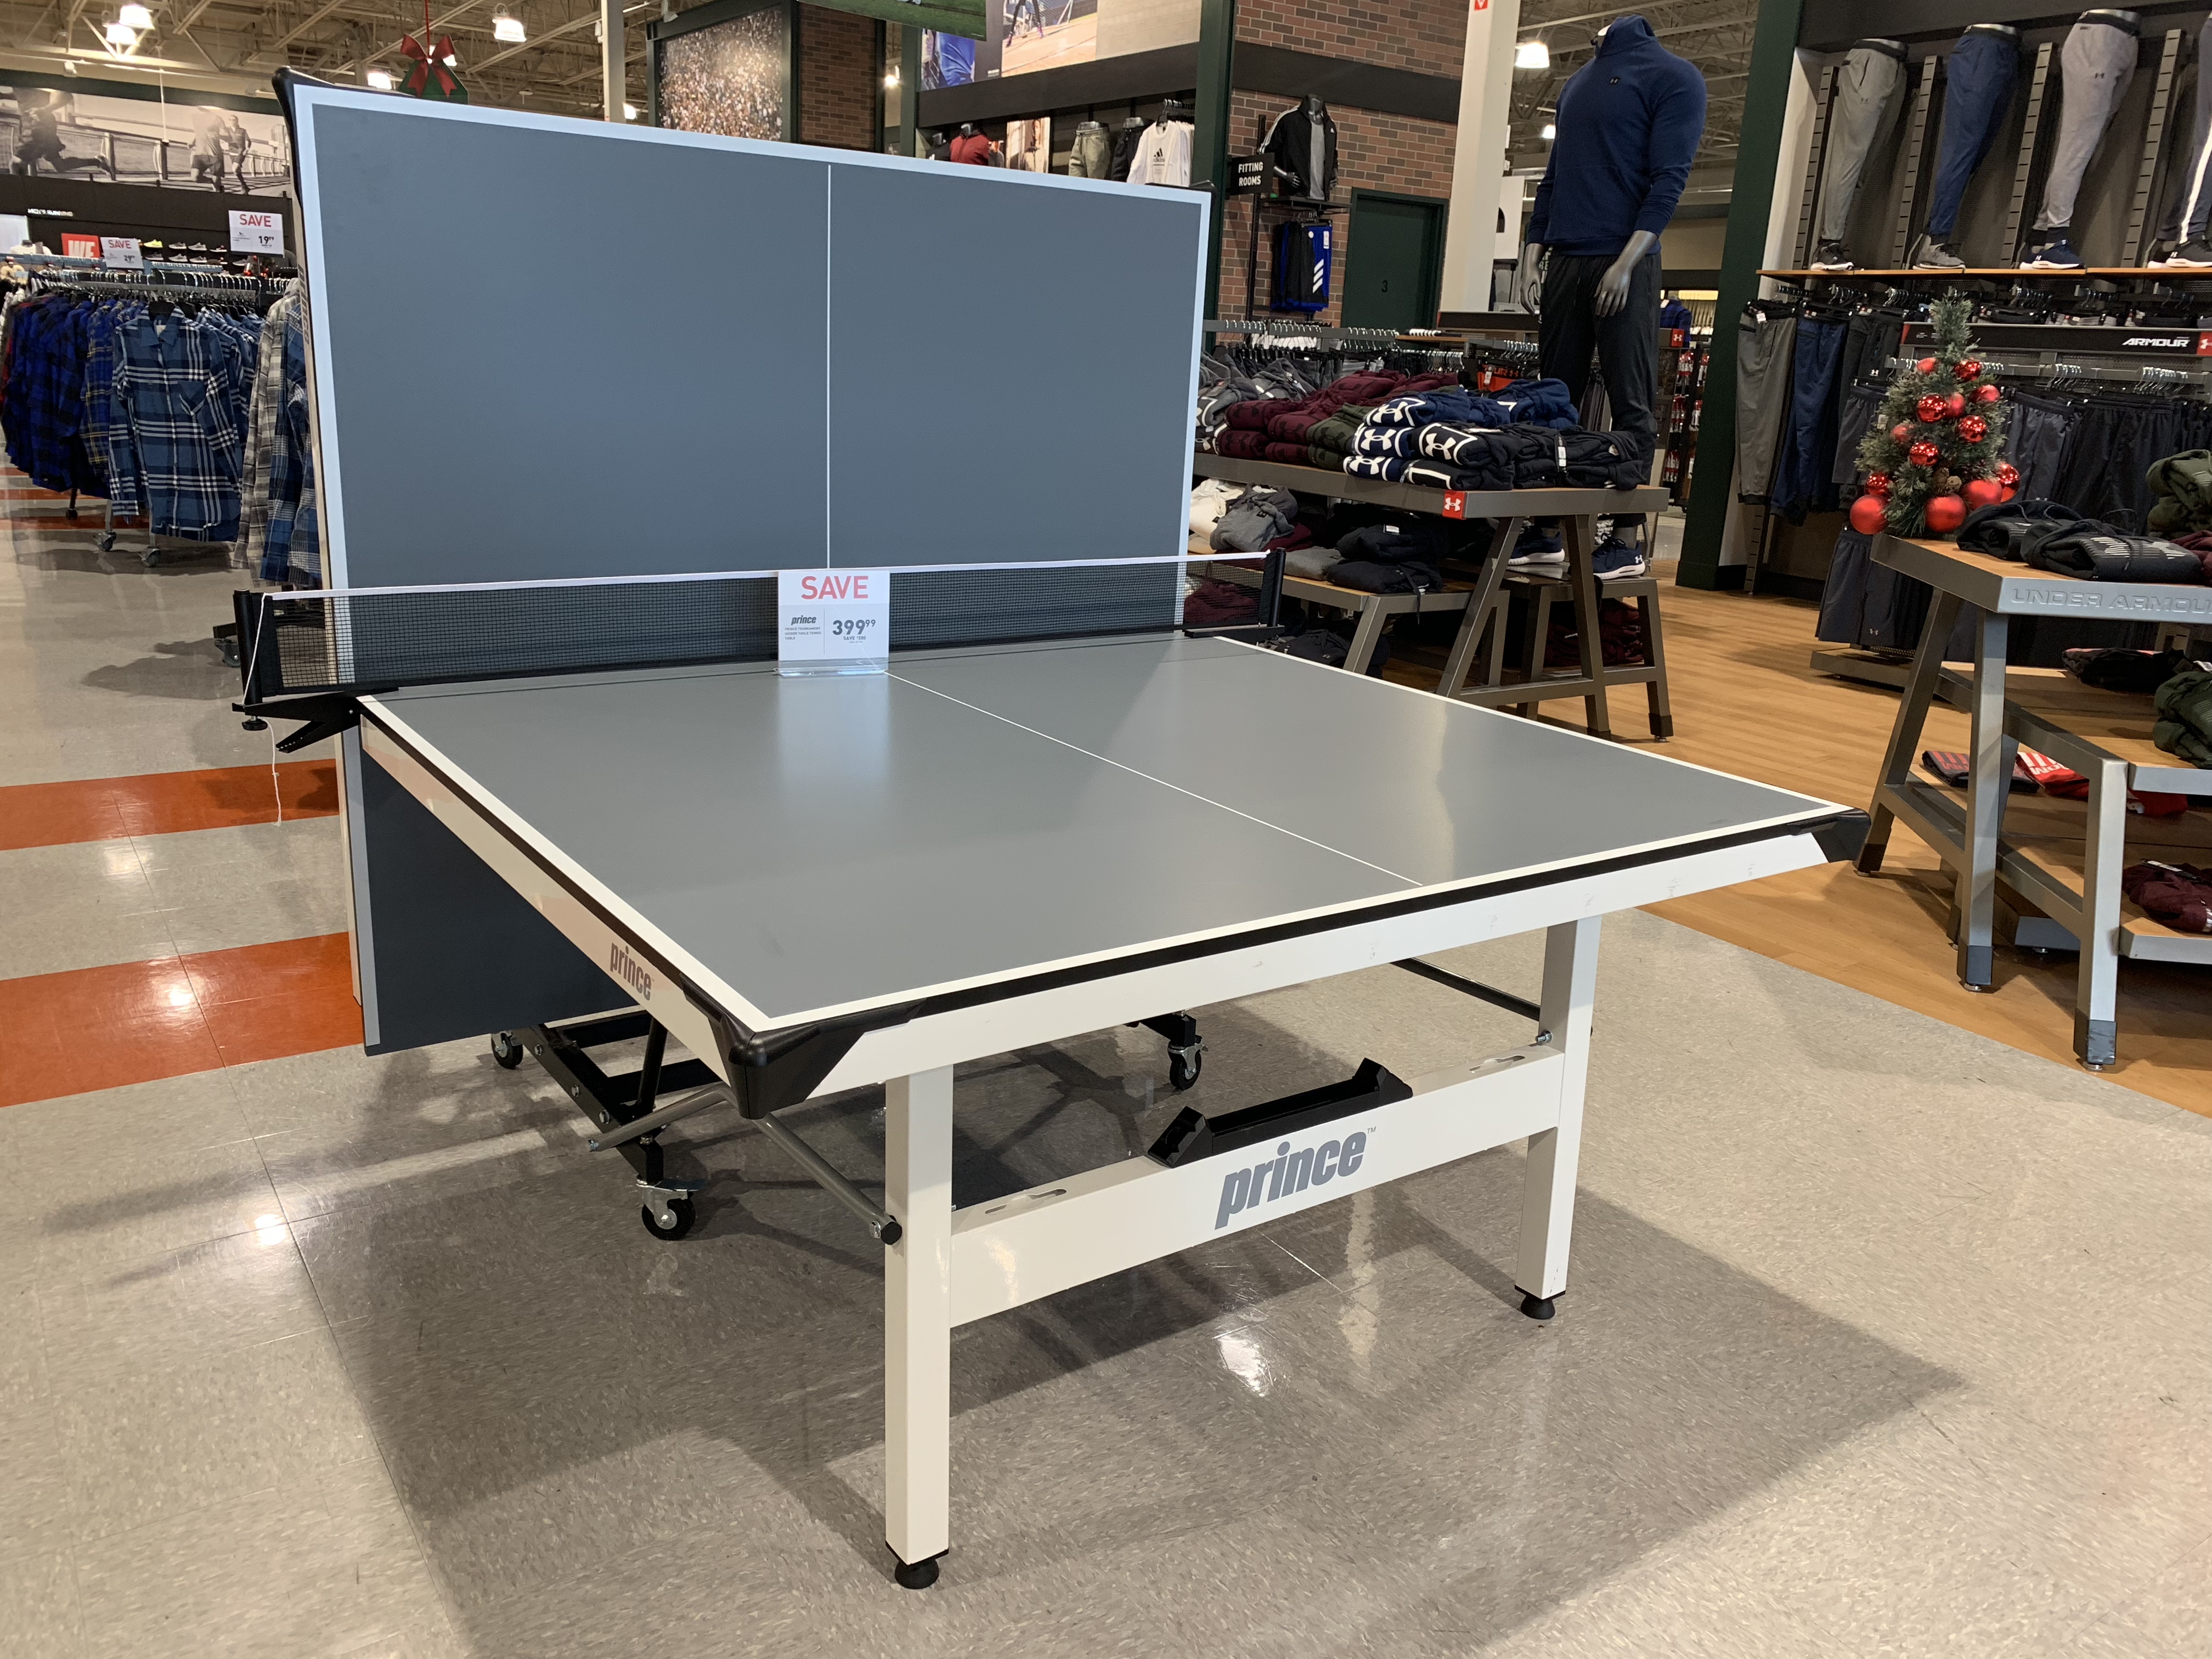 black friday ping pong table deals